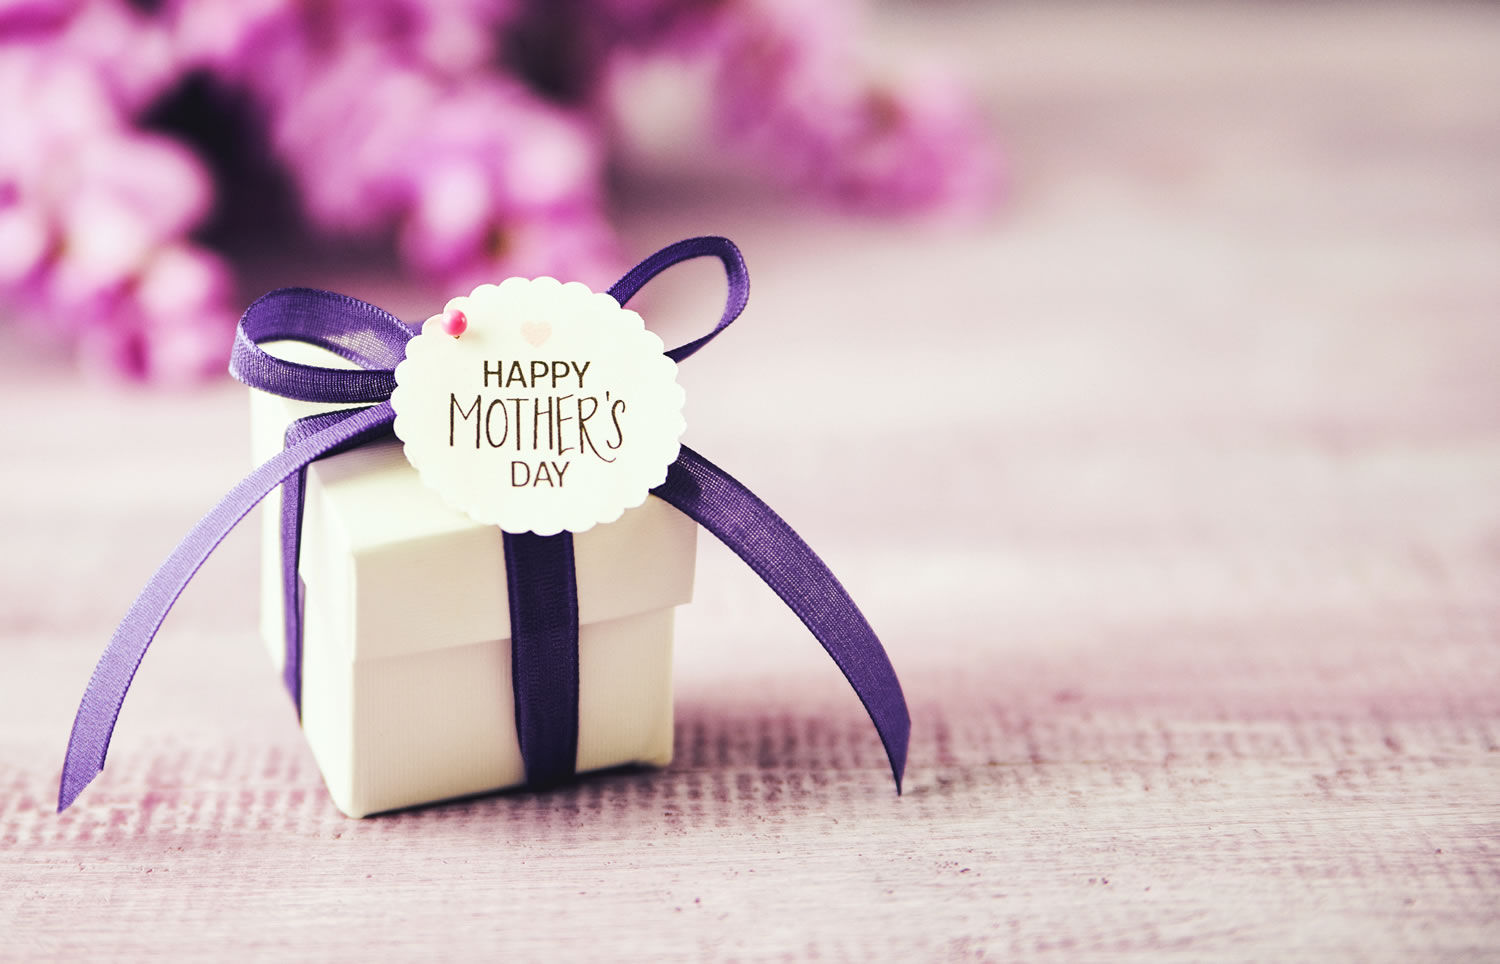 8 Affordable Mother's Day Gifts In Malaysia To Spoil Your Mum With